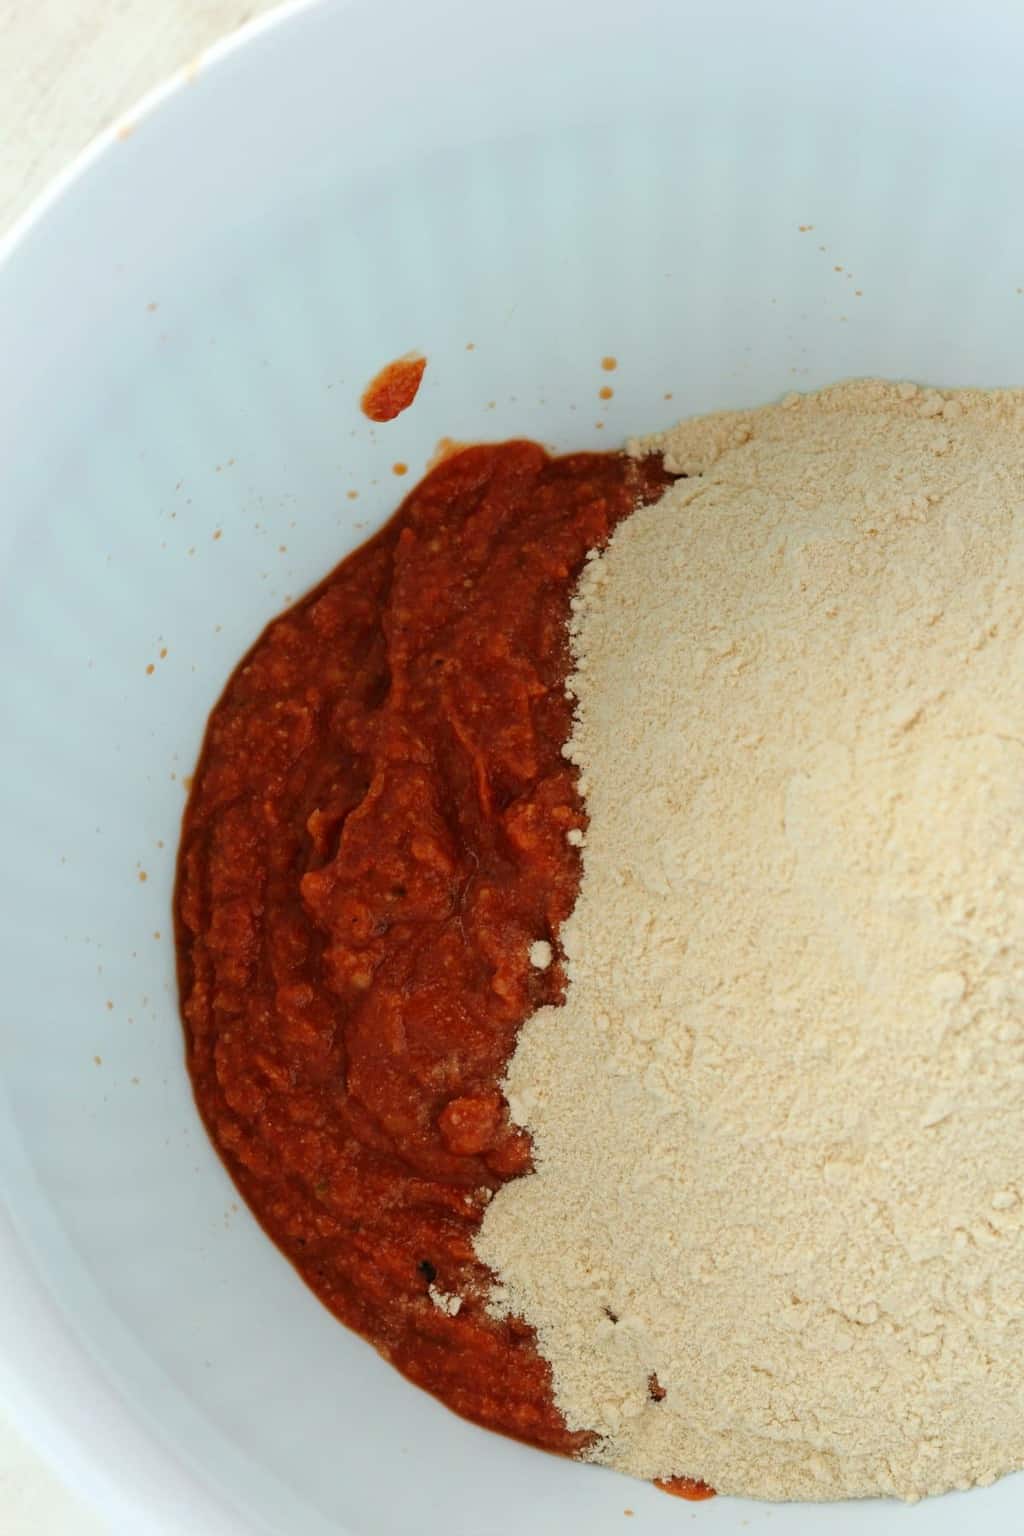 Vital wheat gluten powder and other ingredients in a mixing bowl - making seitan for vegan shawarmas